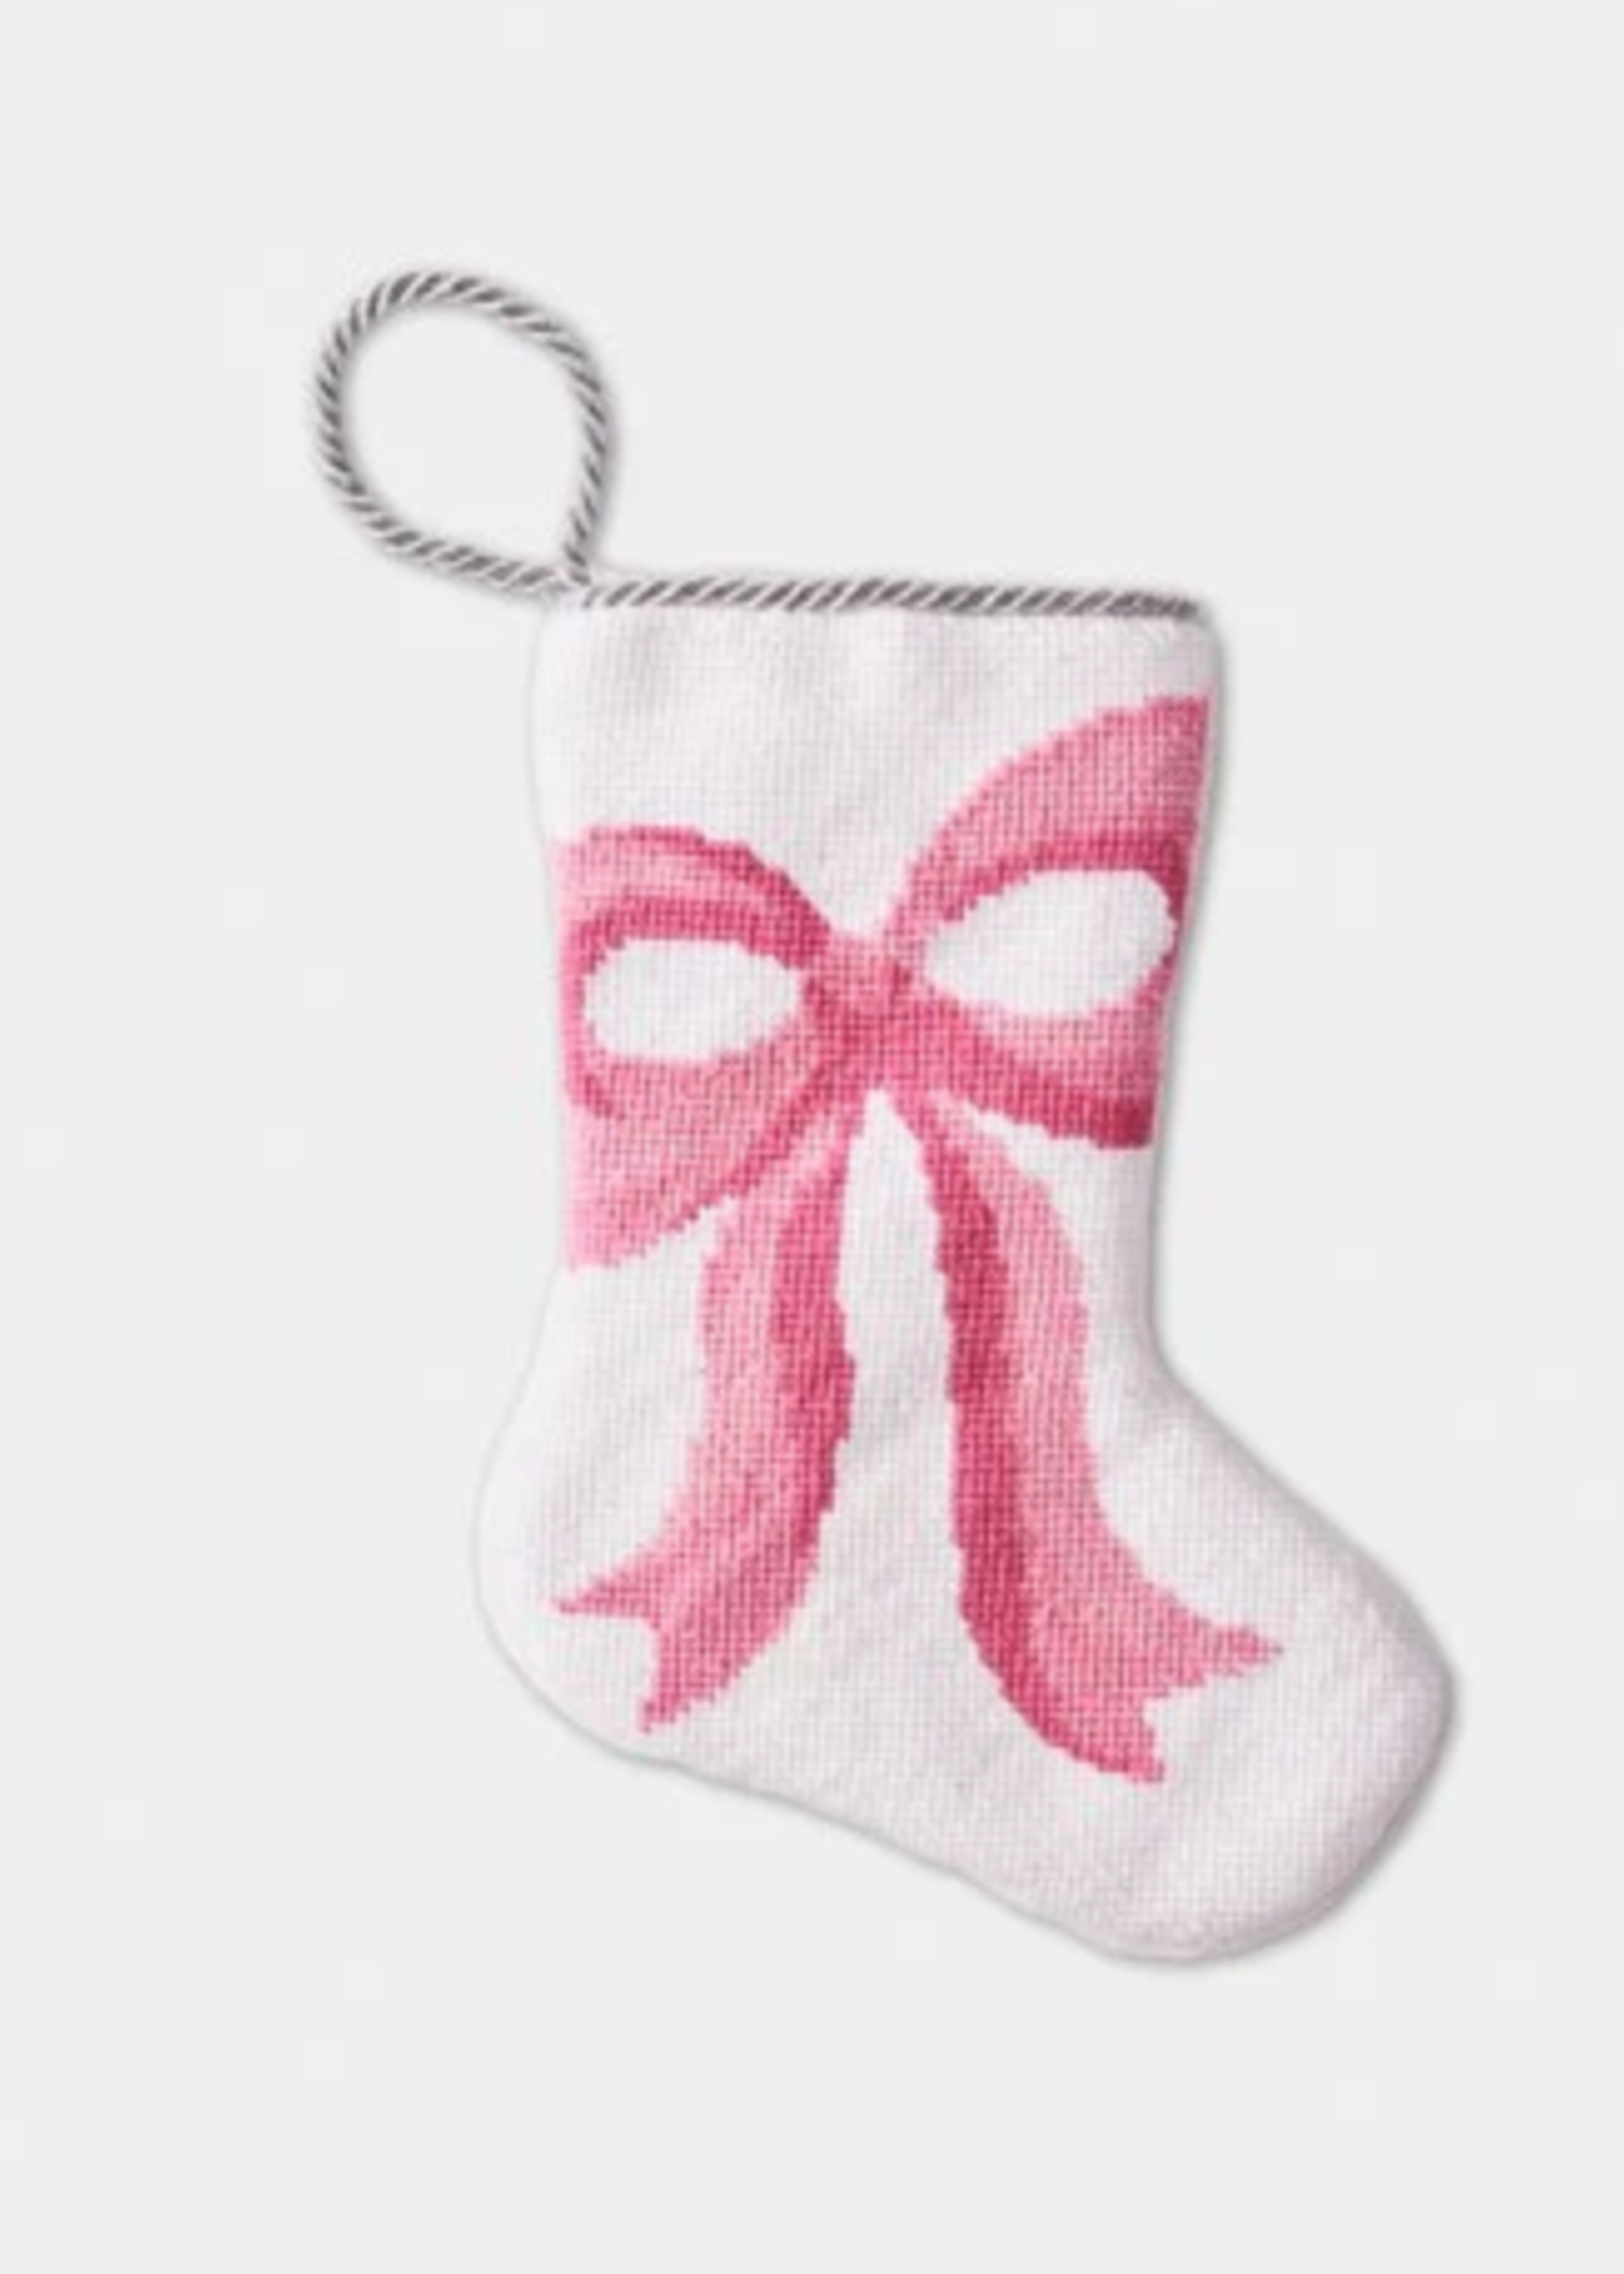 Bauble Stockings Bauble Stocking A Pretty Pink Bow (Hazen)